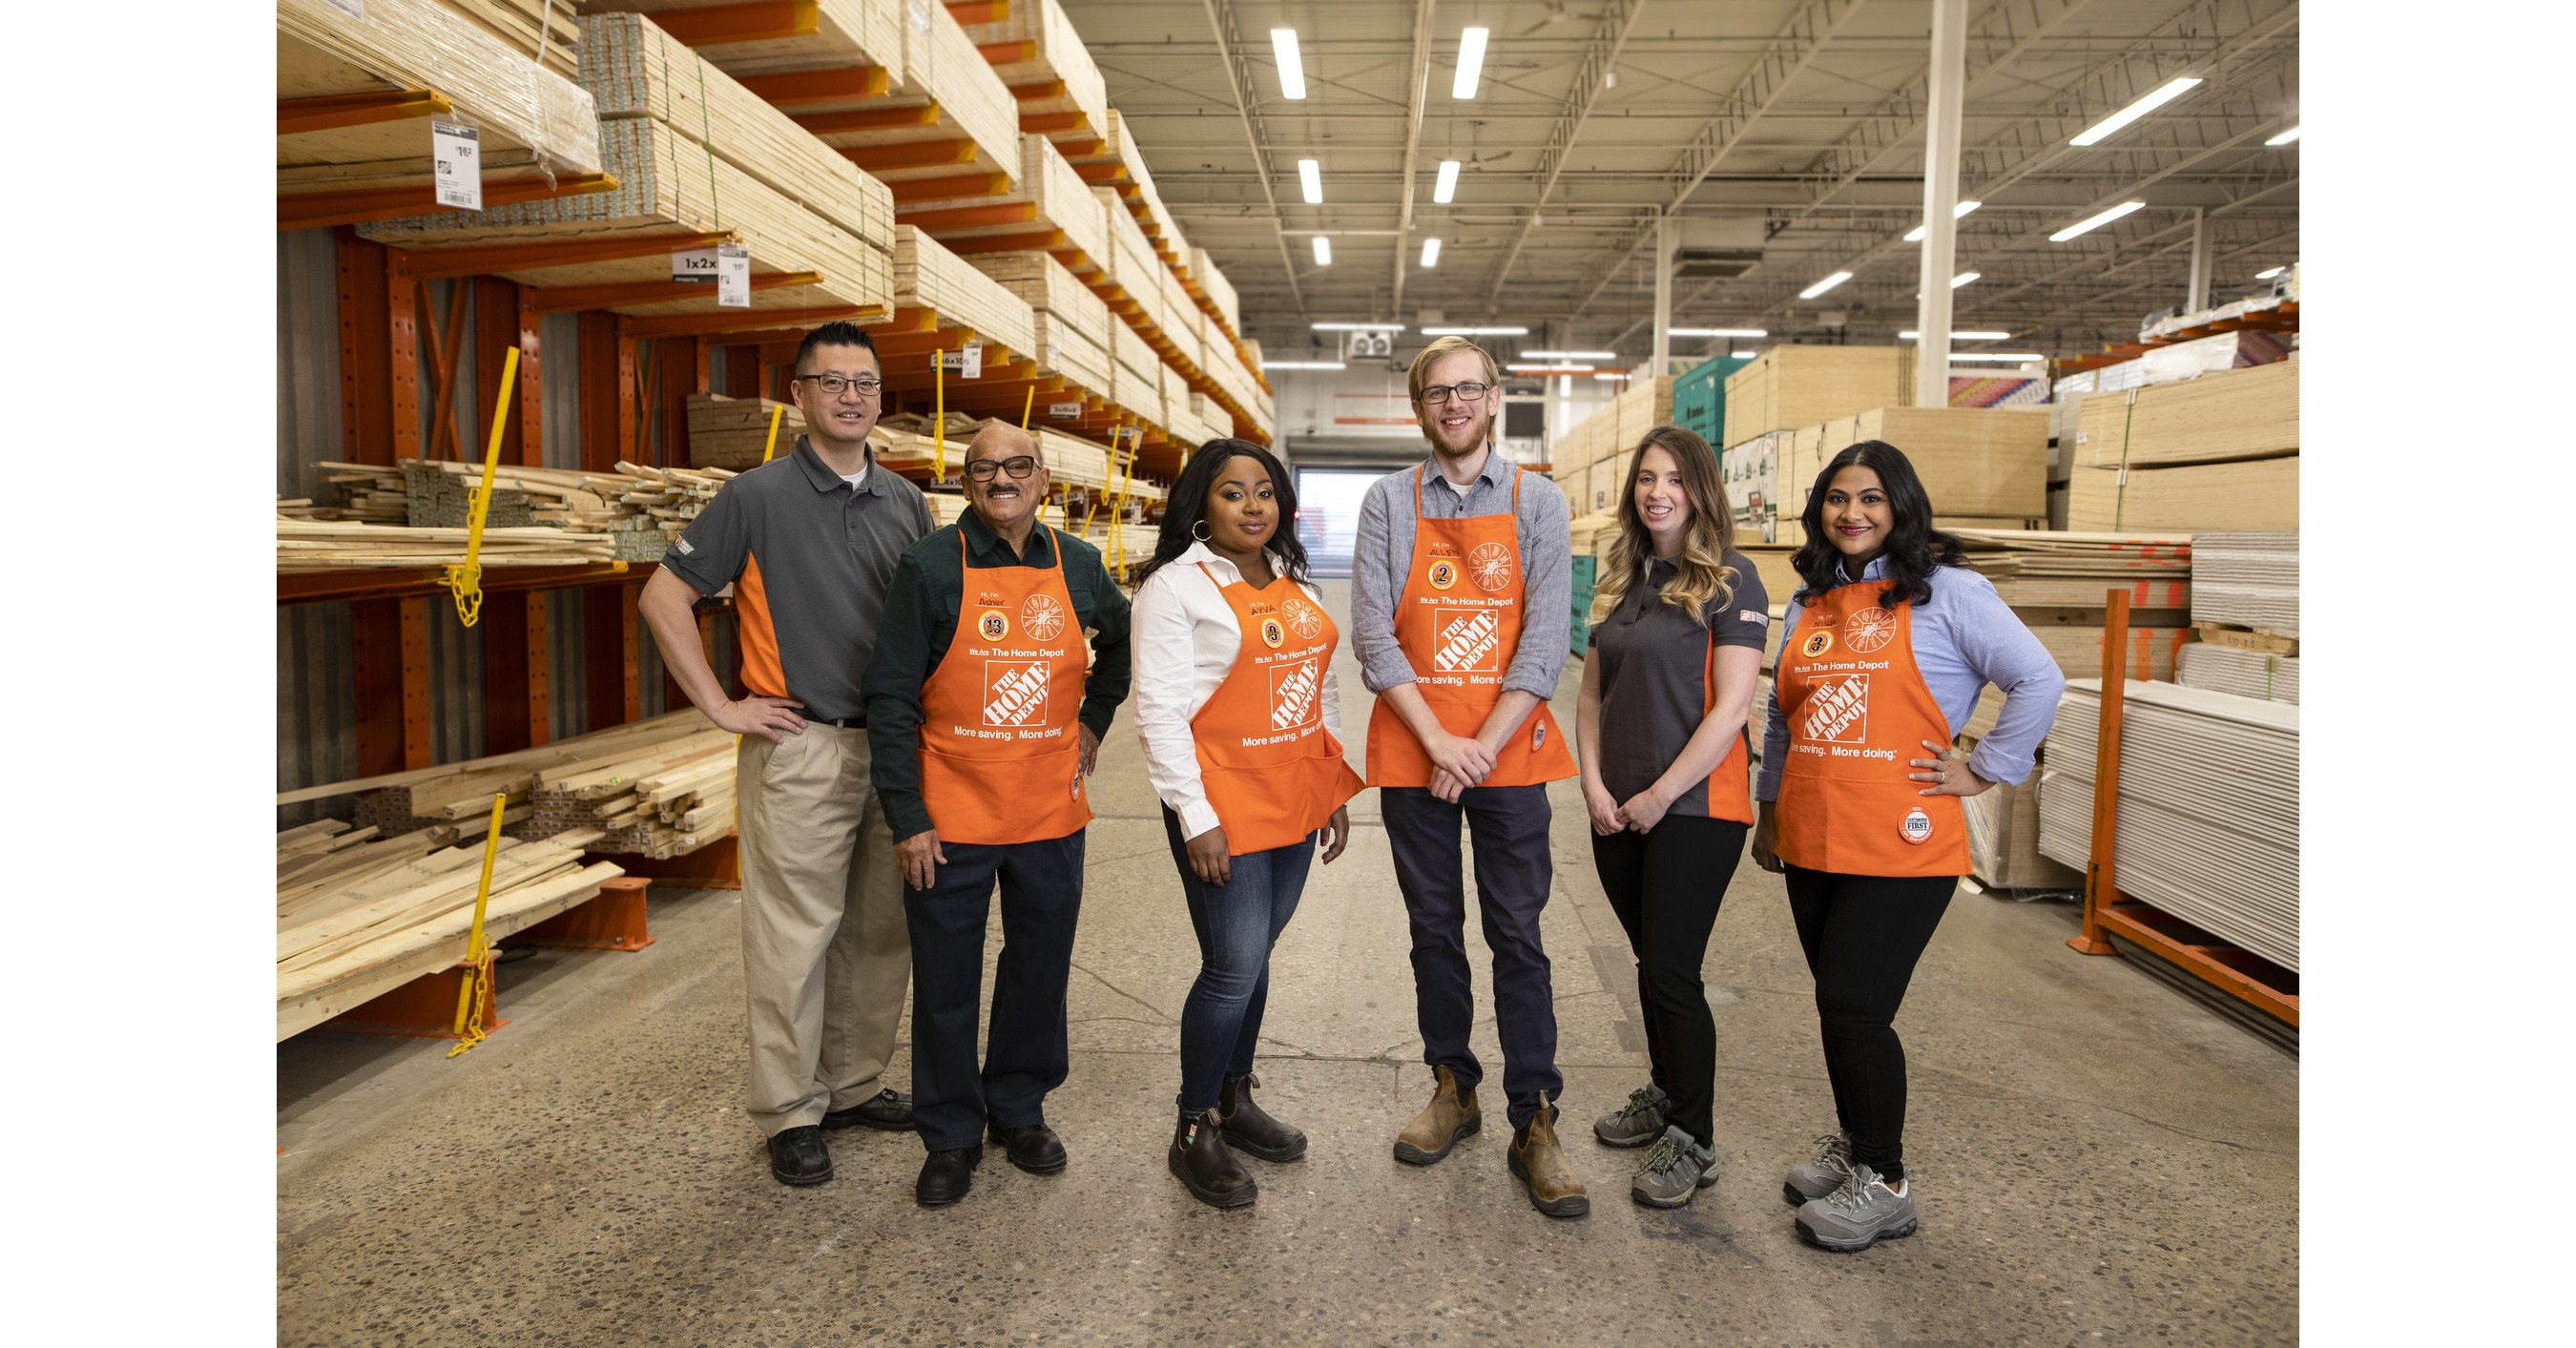 The Home Depot Canada 